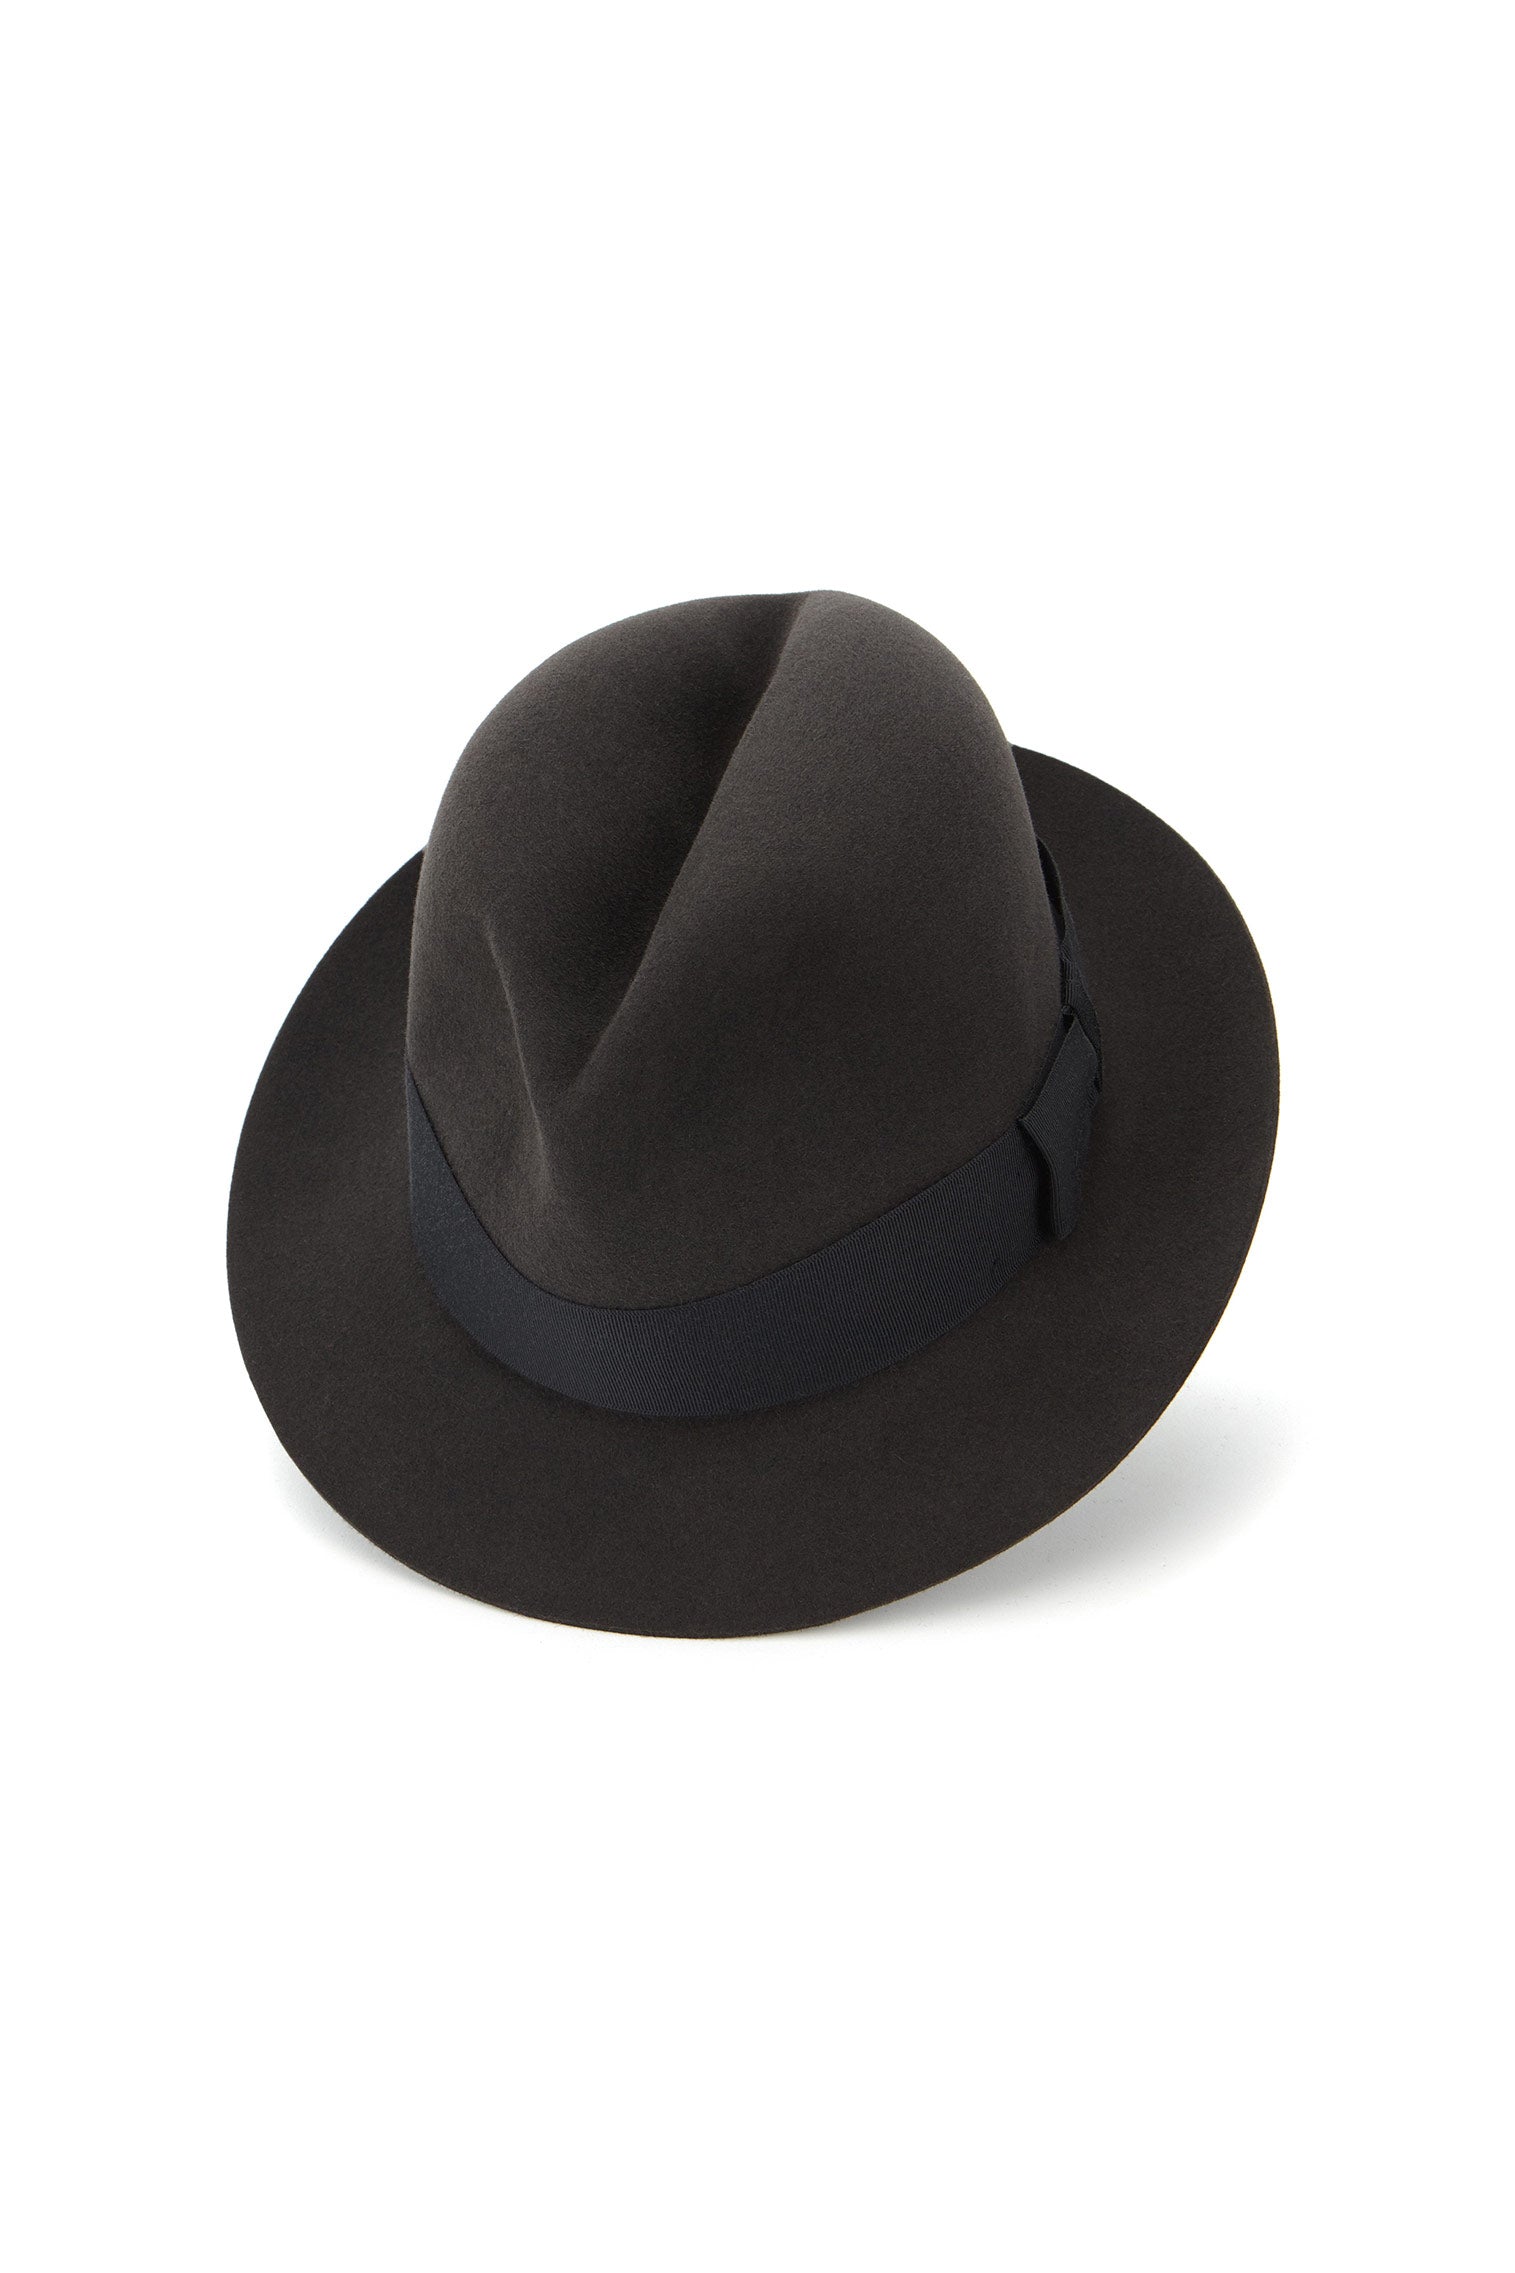 Madison Trilby - All Ready to Wear - Lock & Co. Hatters London UK